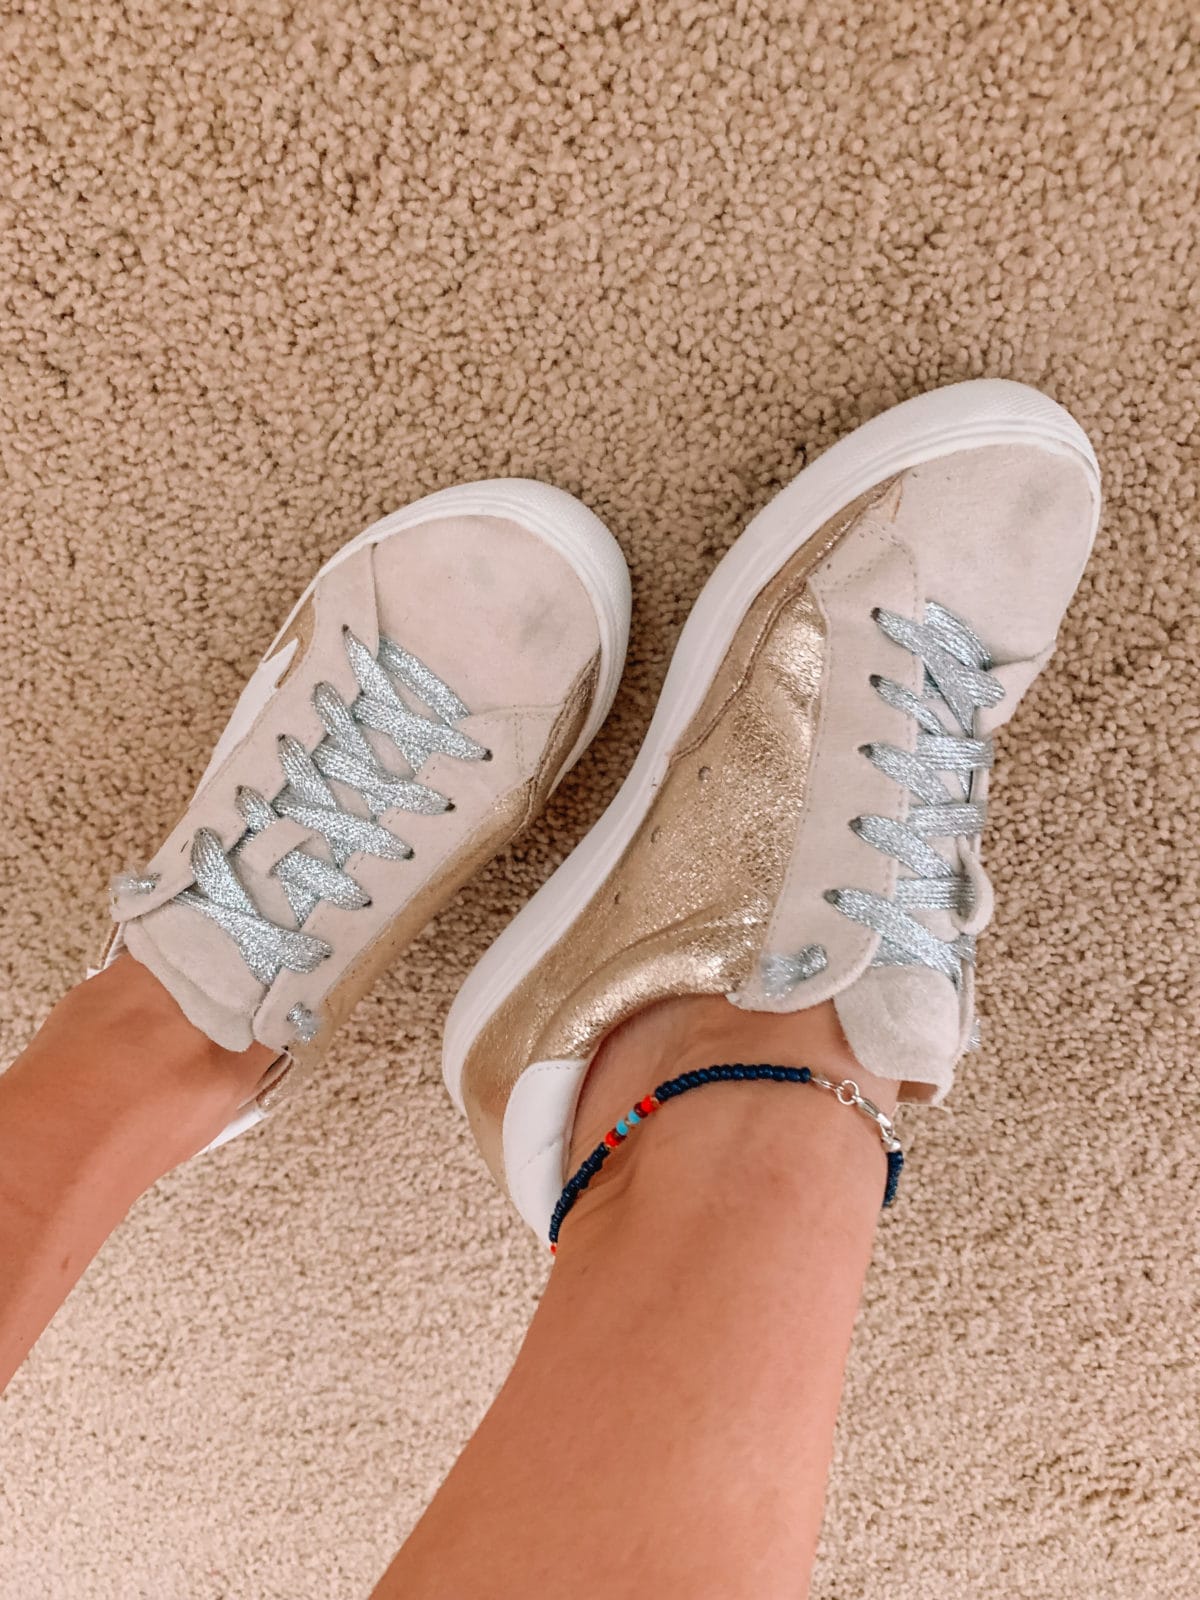 Amazon Fashion Faves, Star Sneakers, Anklet